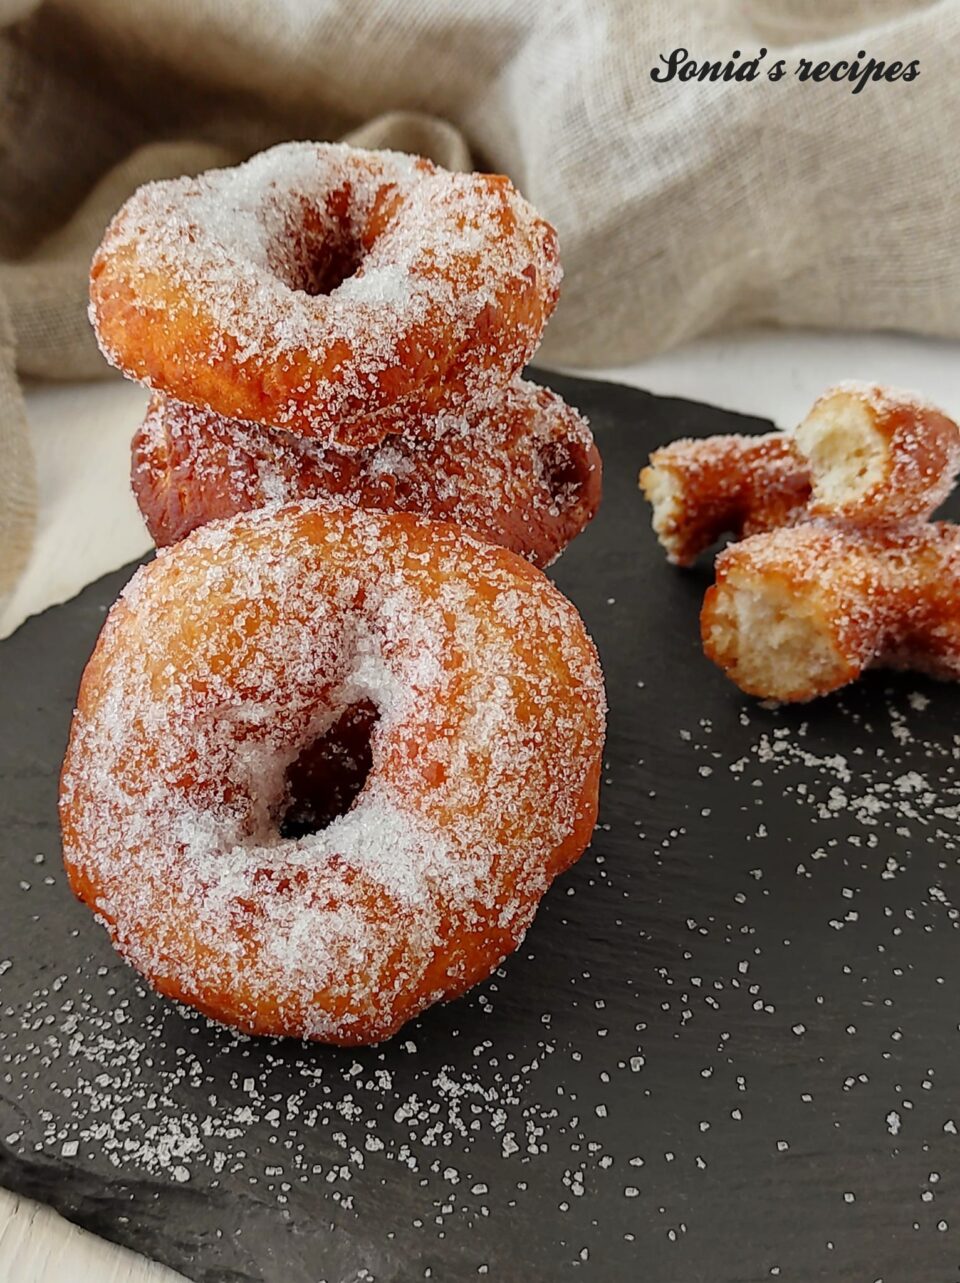 Fried donuts easy recipe